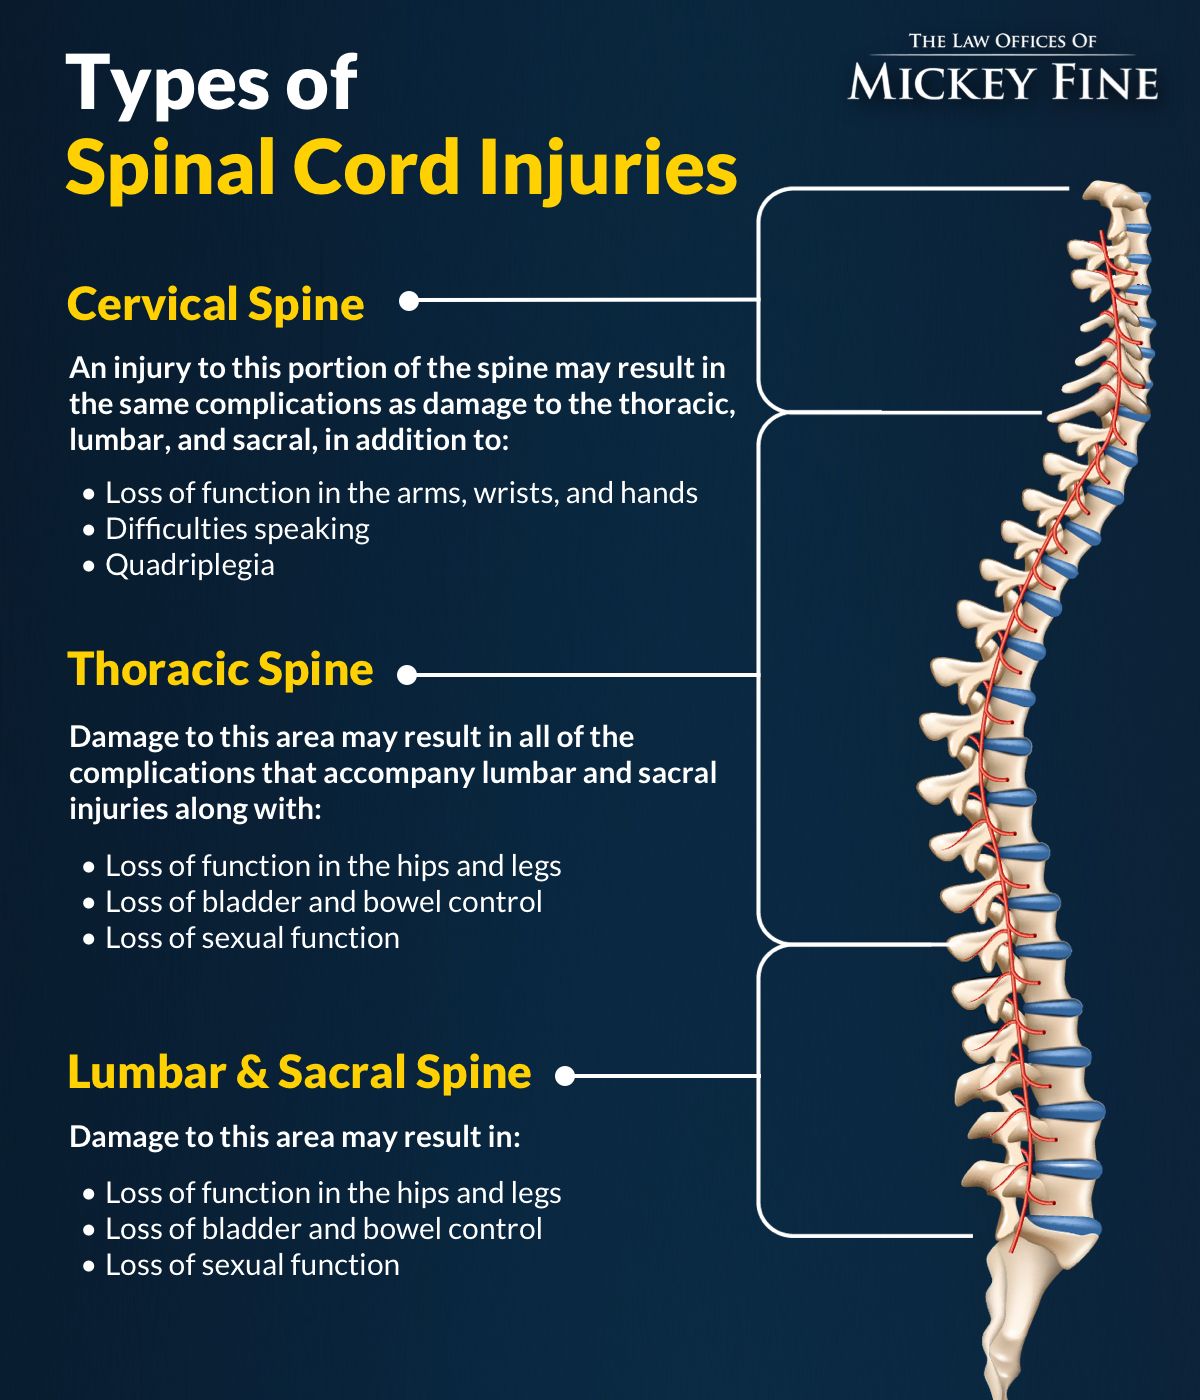 Types of Spinal Cord Injuries